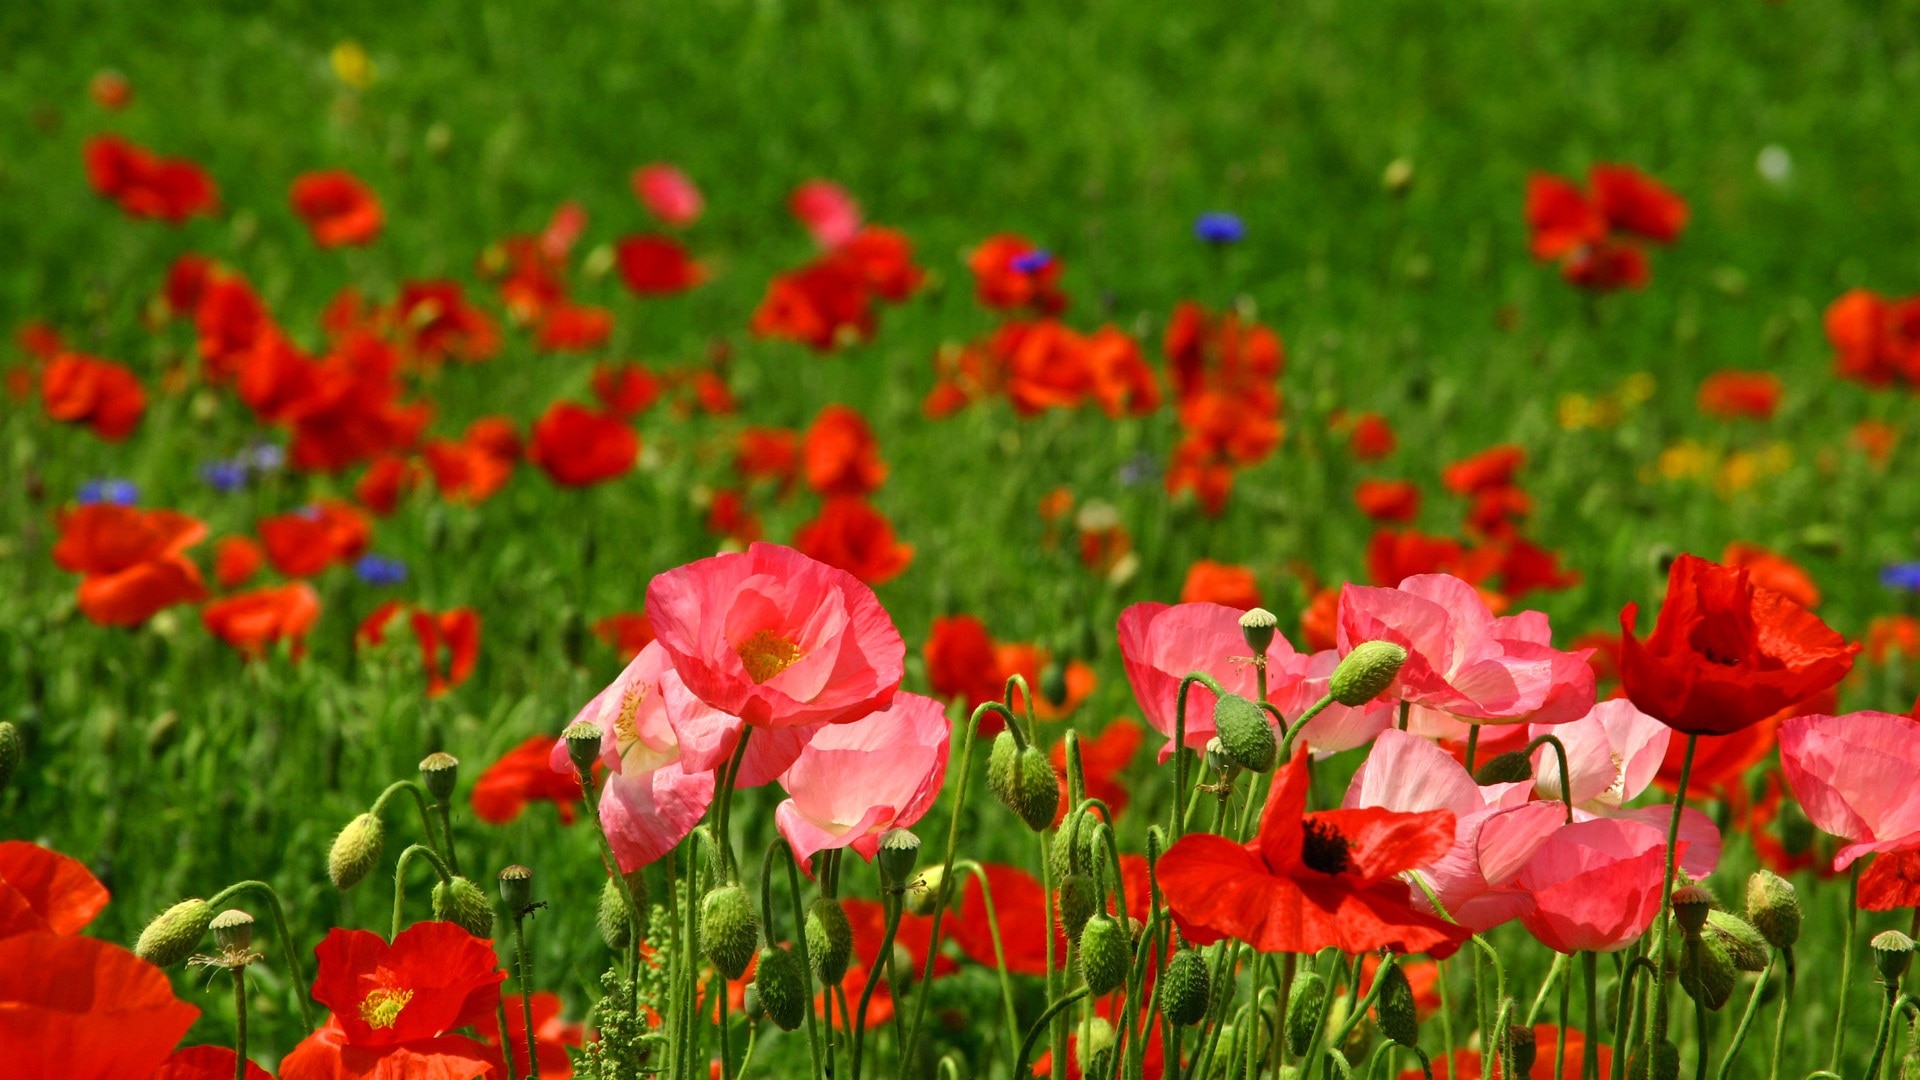 close up photography of red petaled flowers on ground